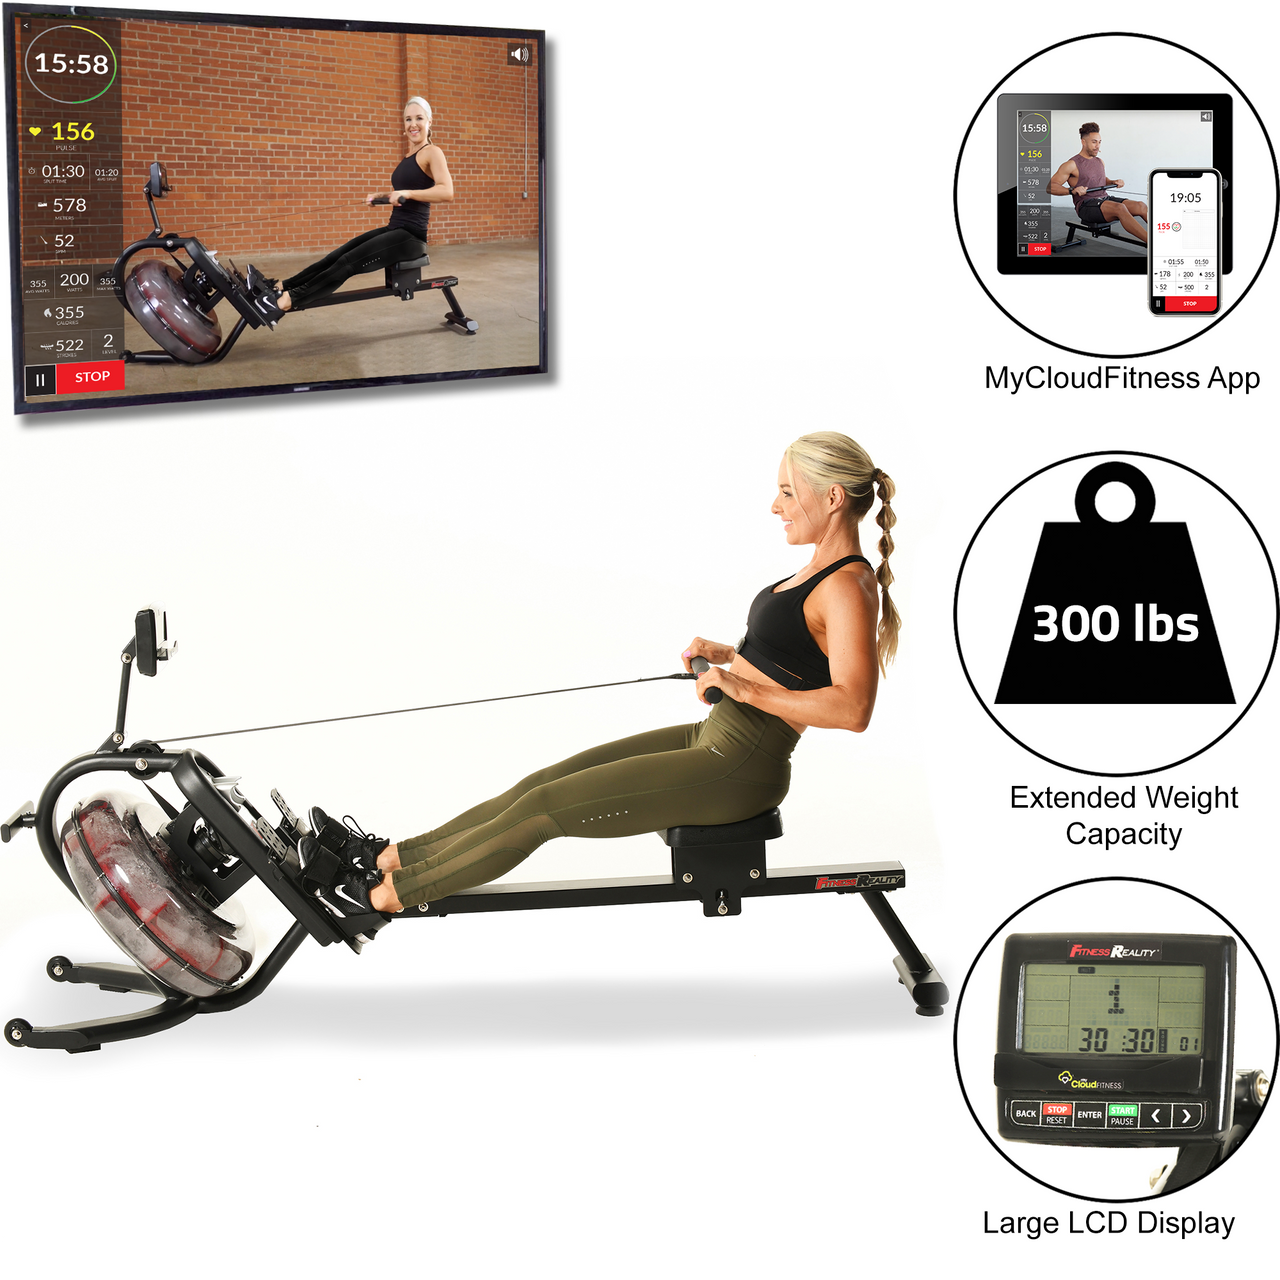 Fitness Reality Bluetooth Rower : Target